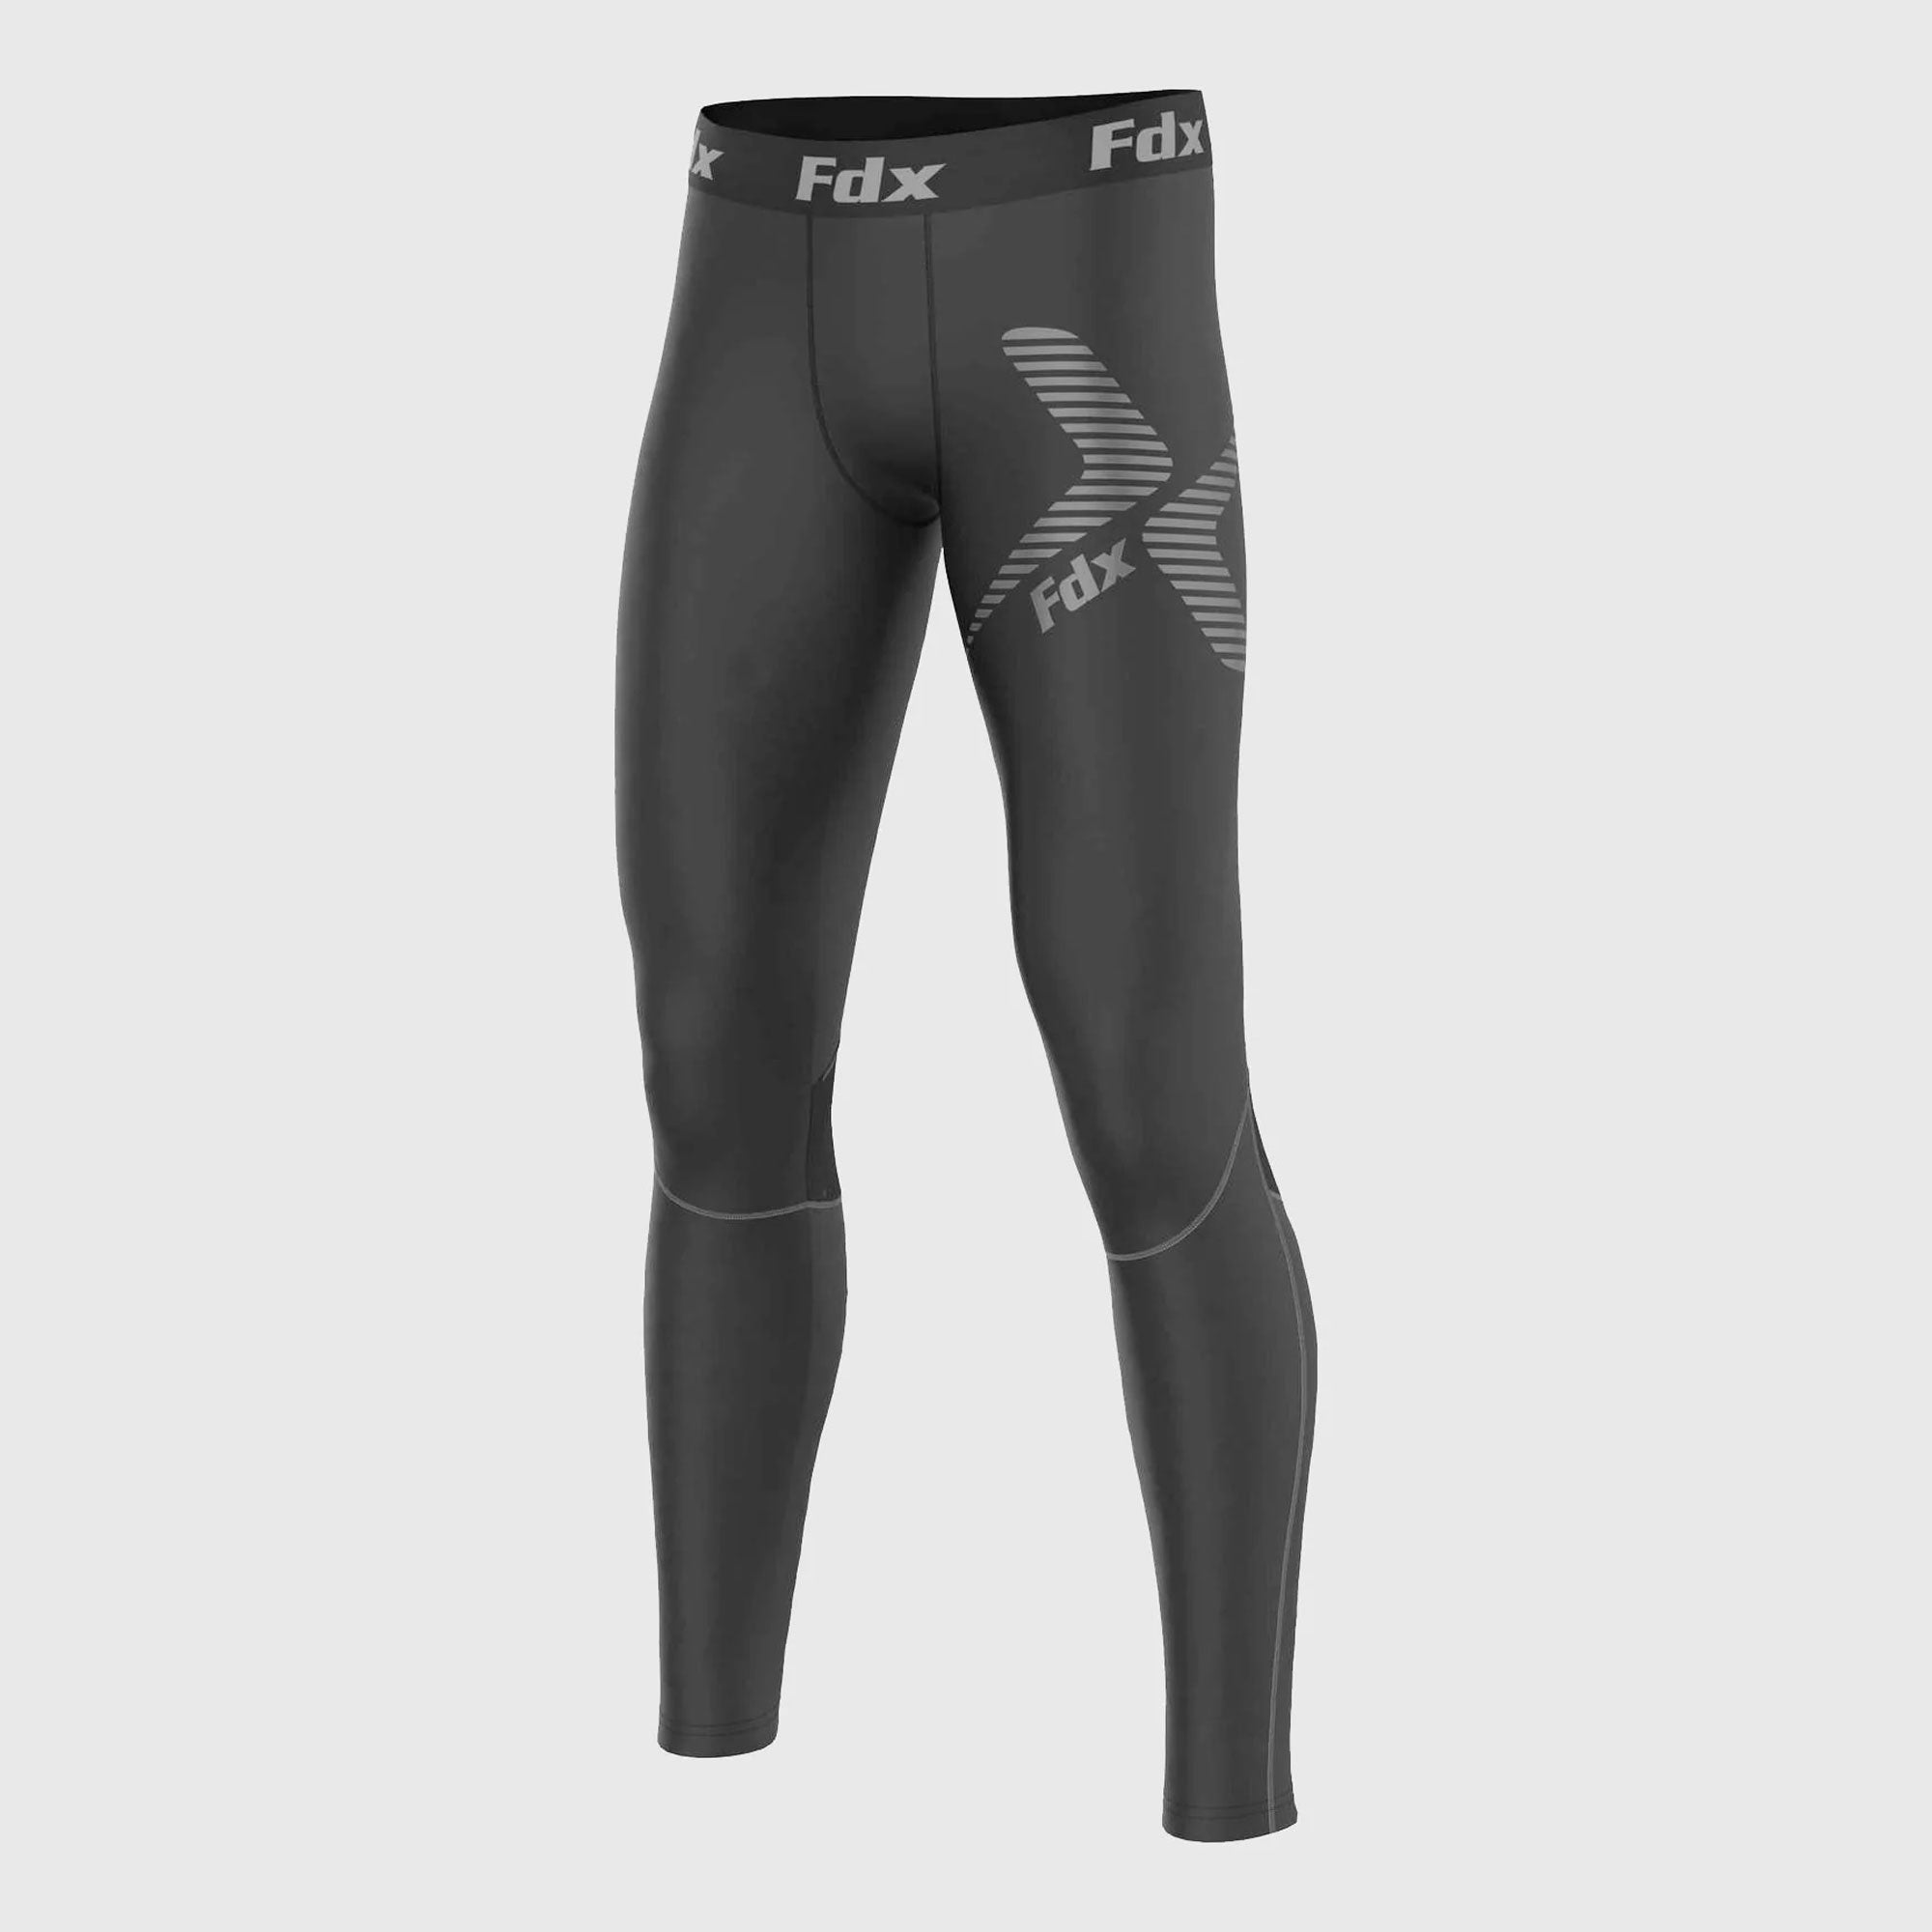 REI Co-op Midweight Base Layer Tights - Women's Petite Sizes